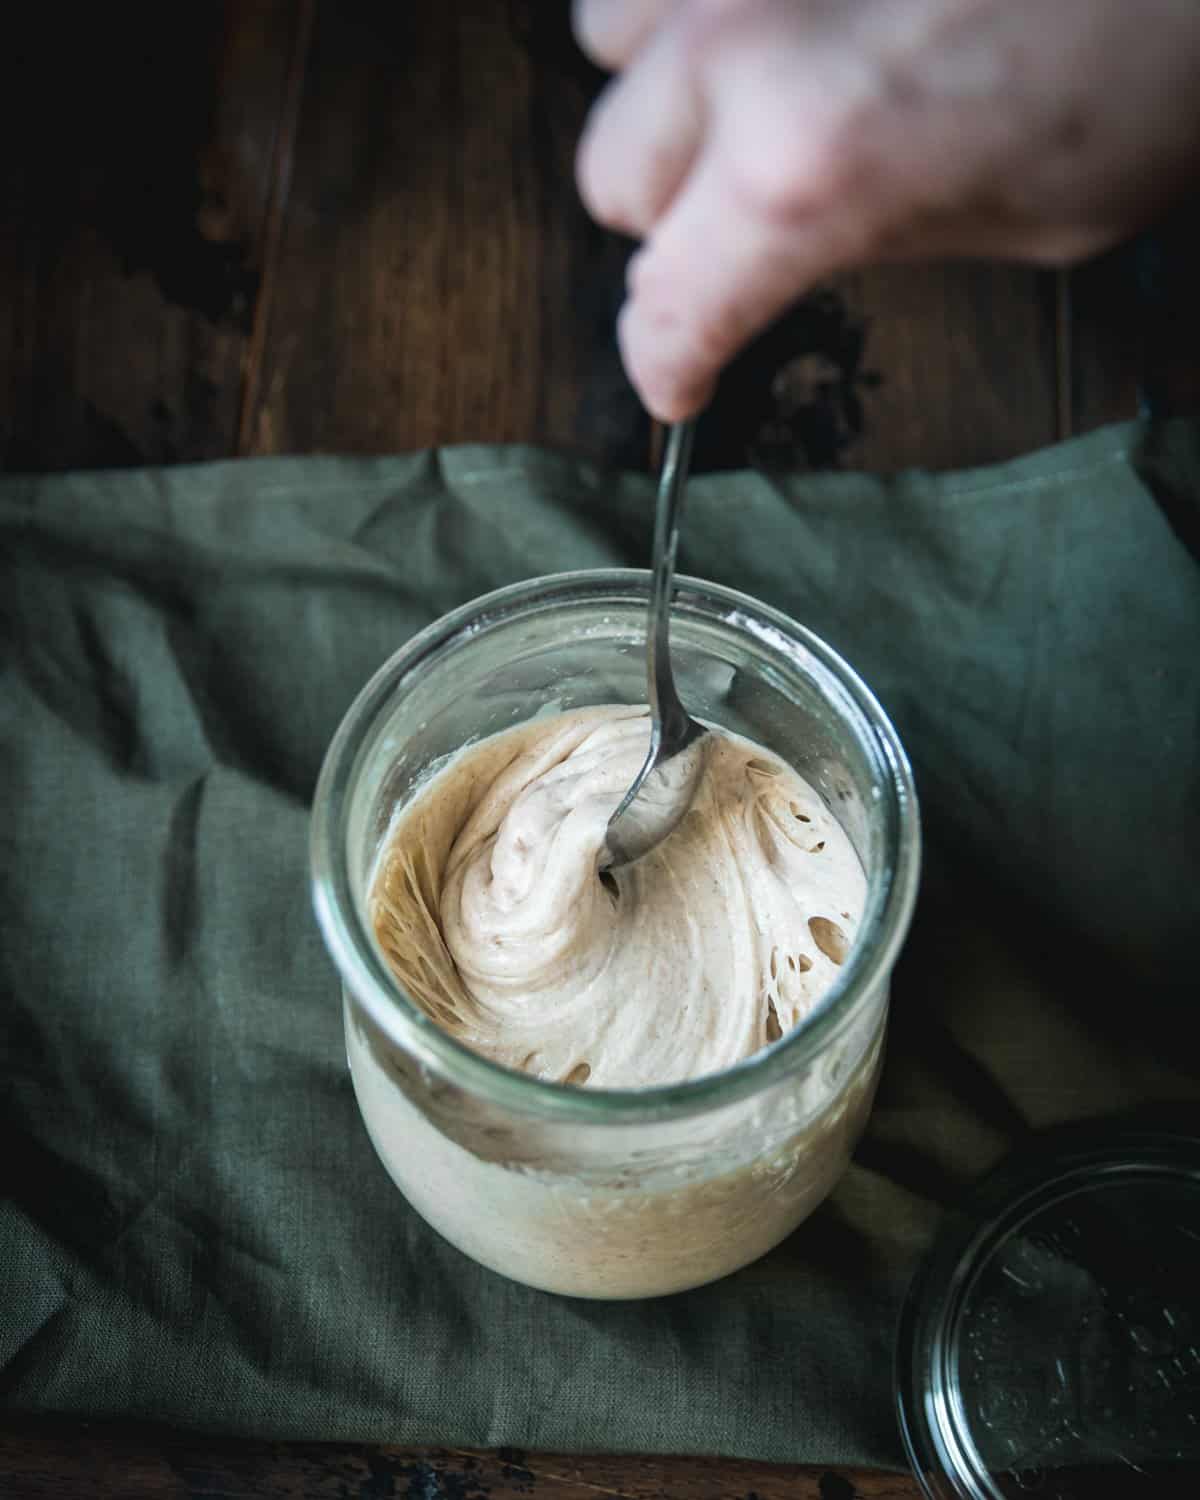 A hand stirring a sourdough starter resting on a forest green natural fabric.